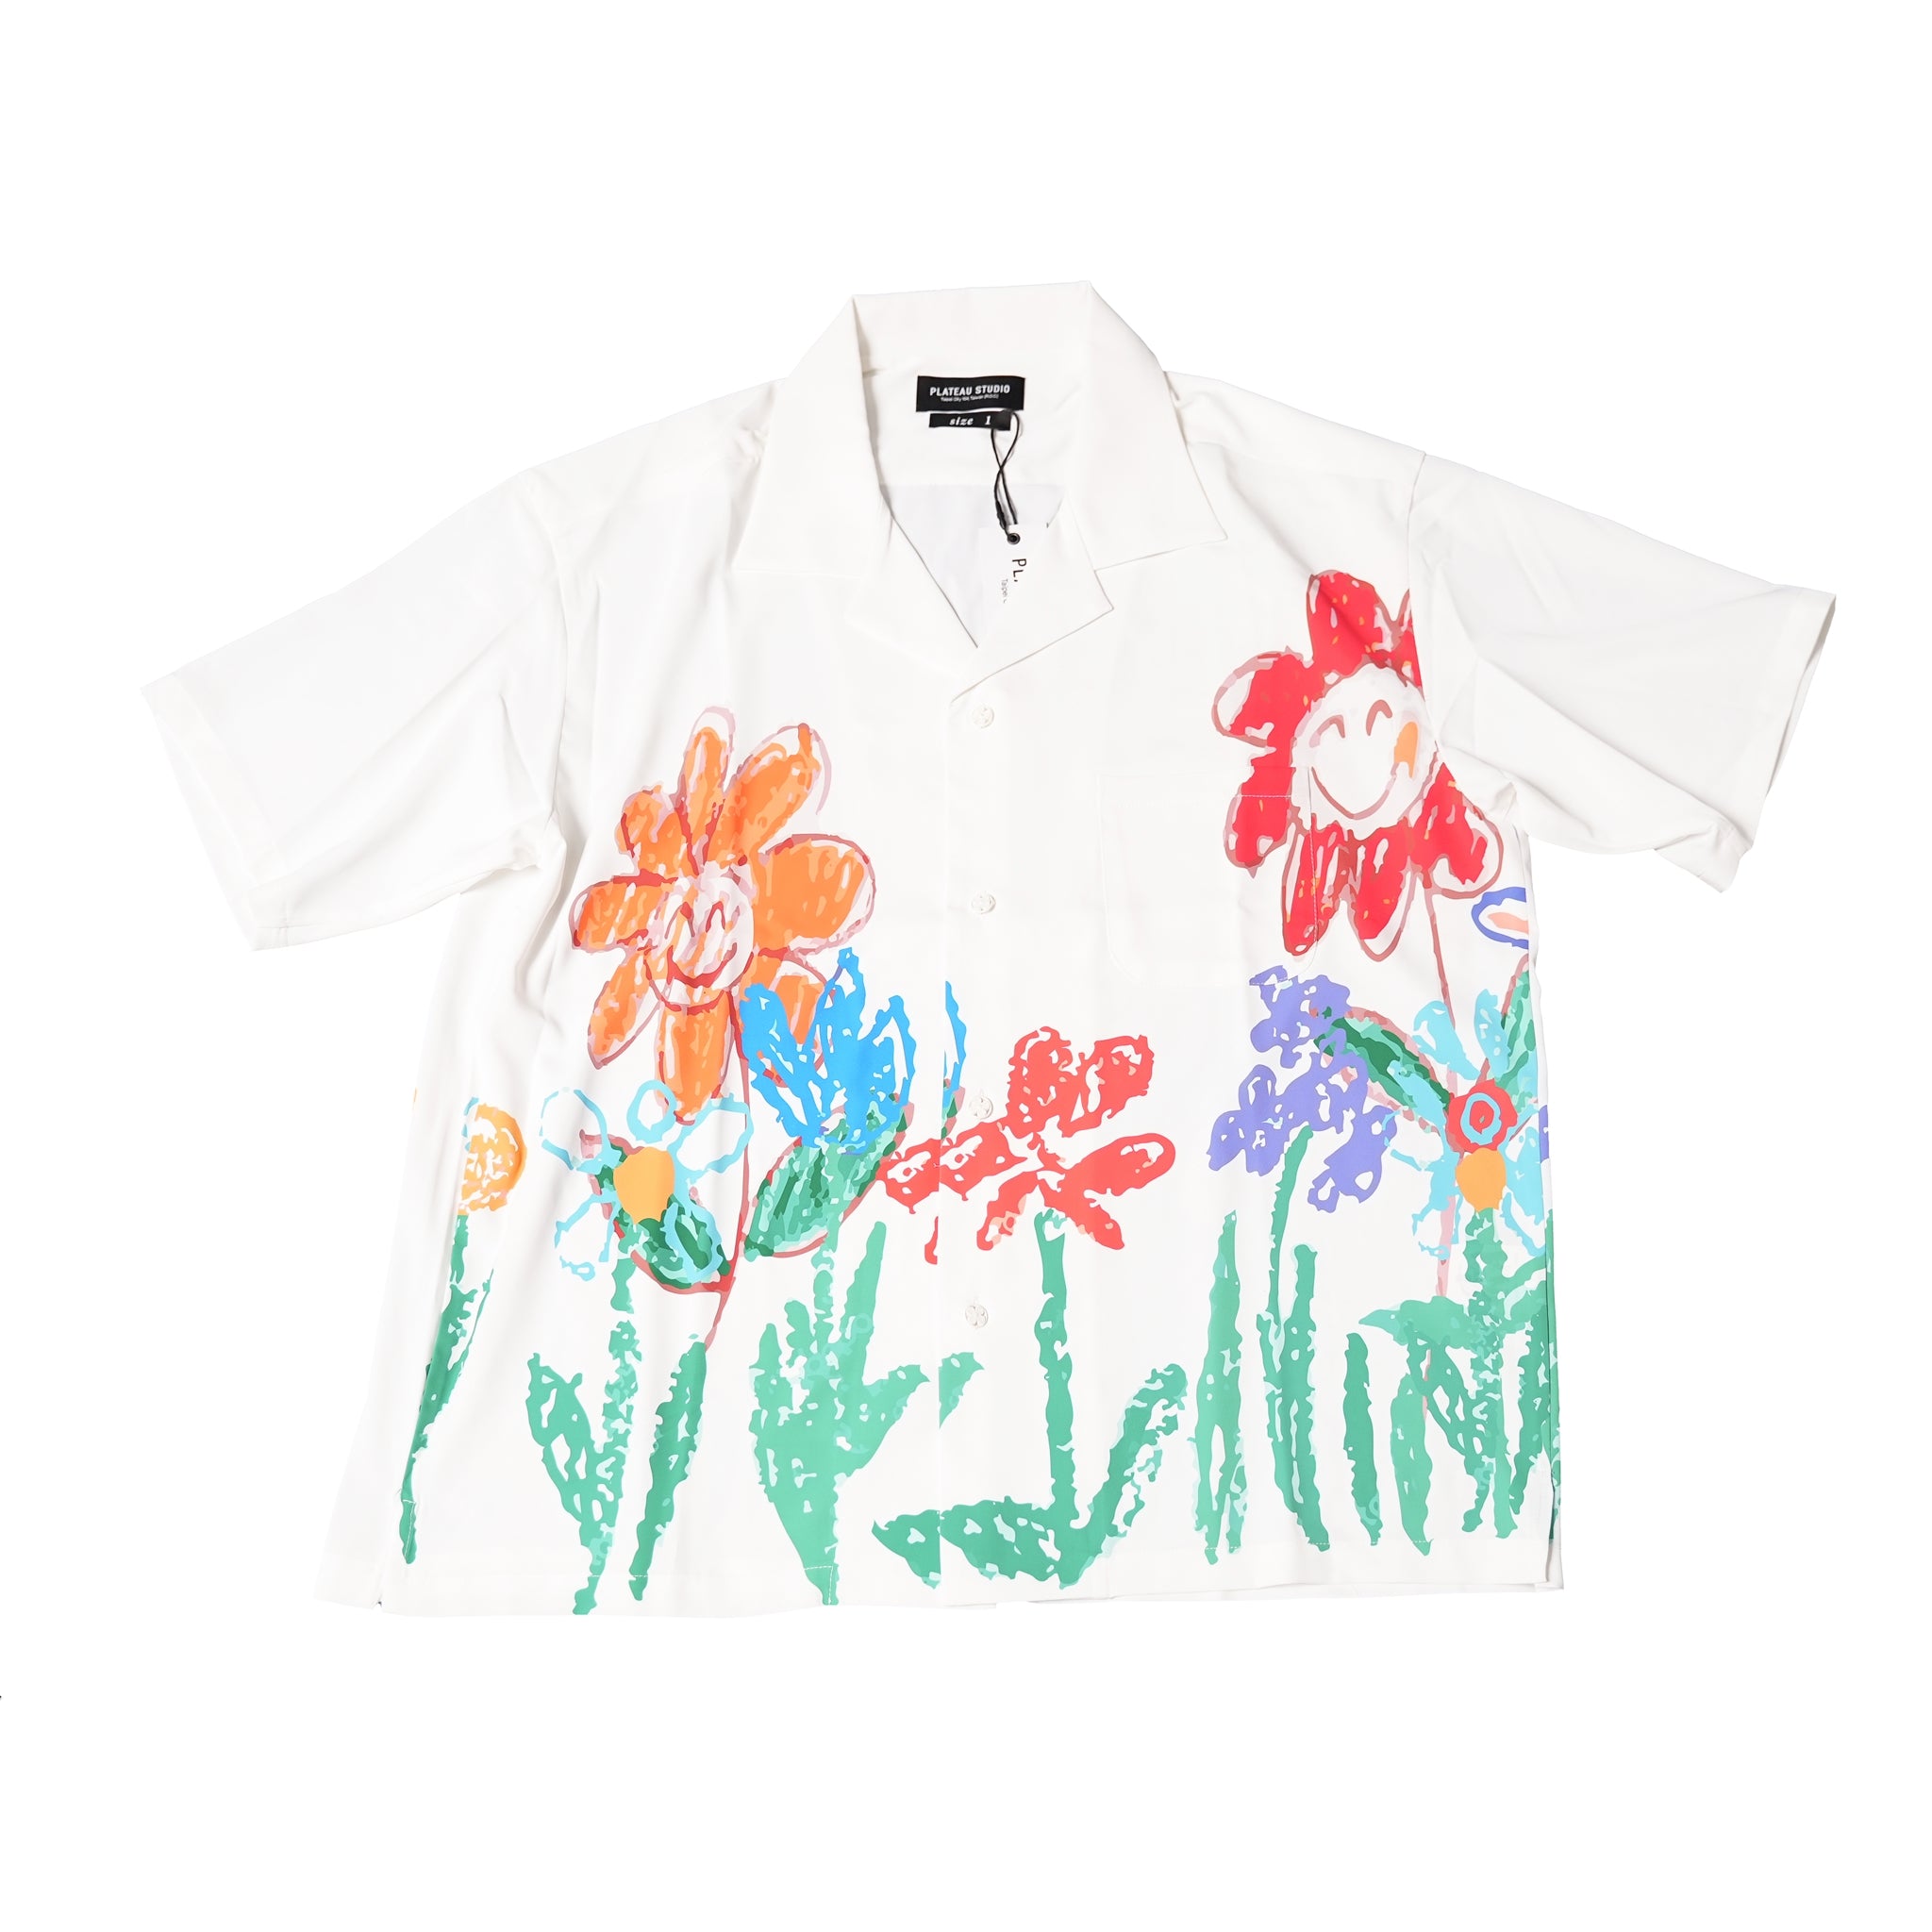 No:ps22t01-1 | Name:PICASSO SHIRT | Color:White body with print【PLATEAU STUDIO_プラトー スタジオ】